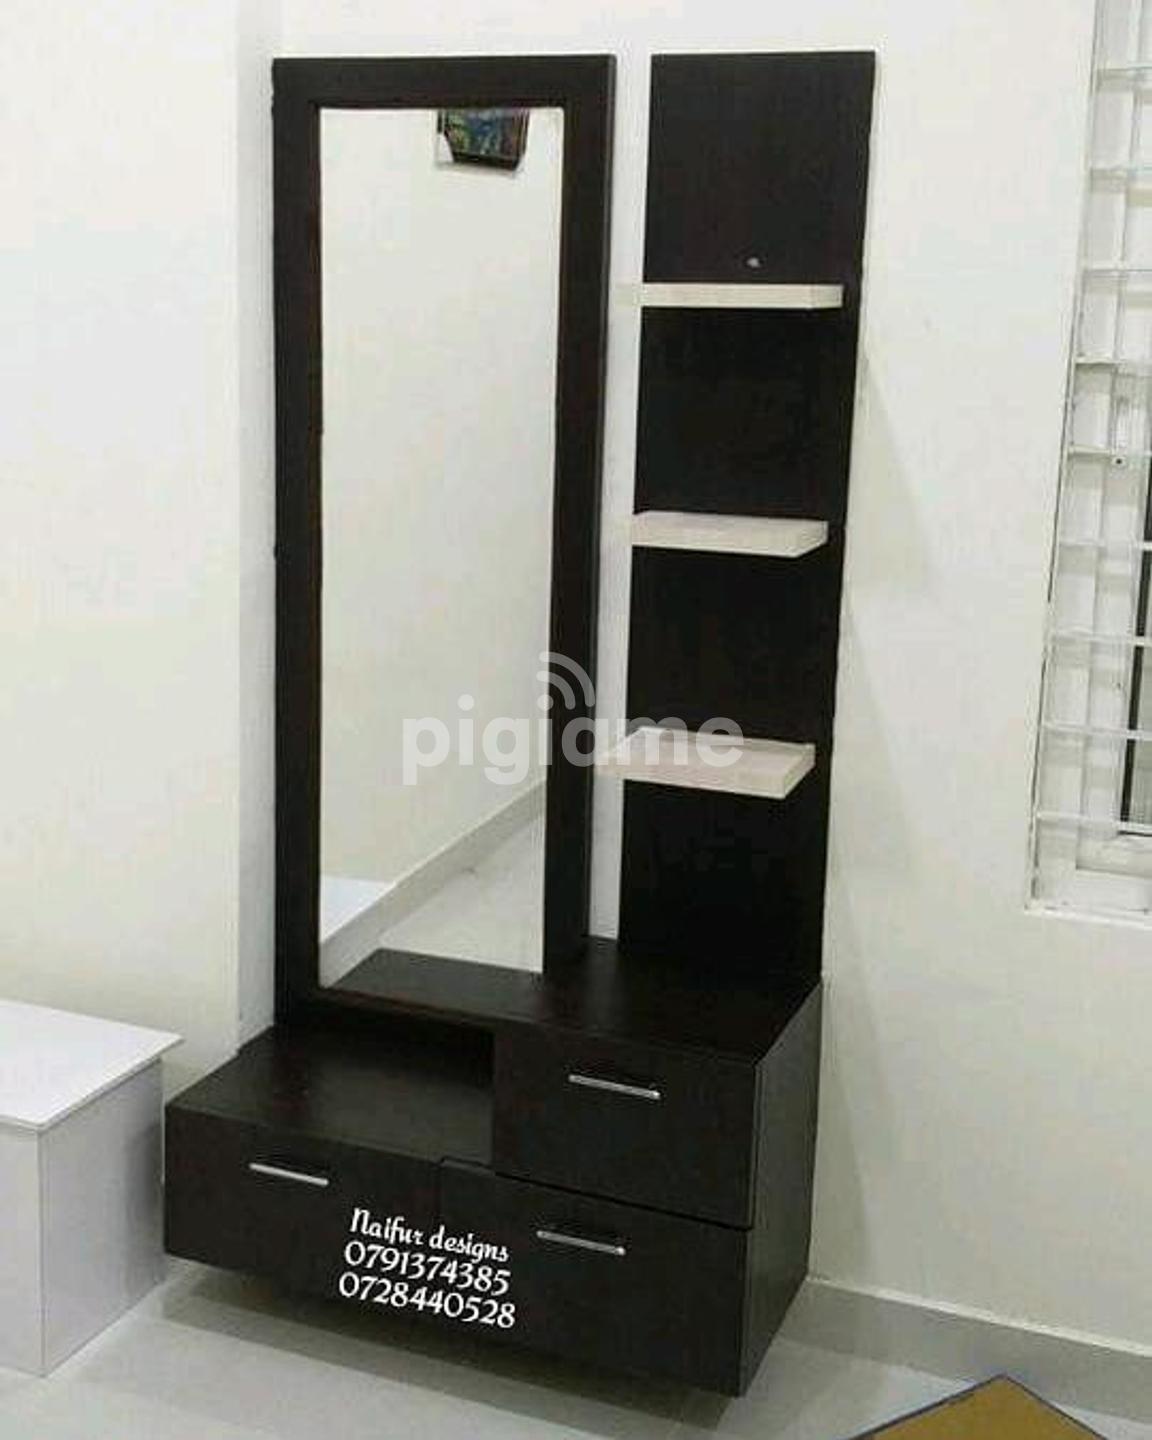 Modern Dresser Dressing Table With Mirror In Nairobi Pigiame,Small House Modern House Design 2020 Philippines